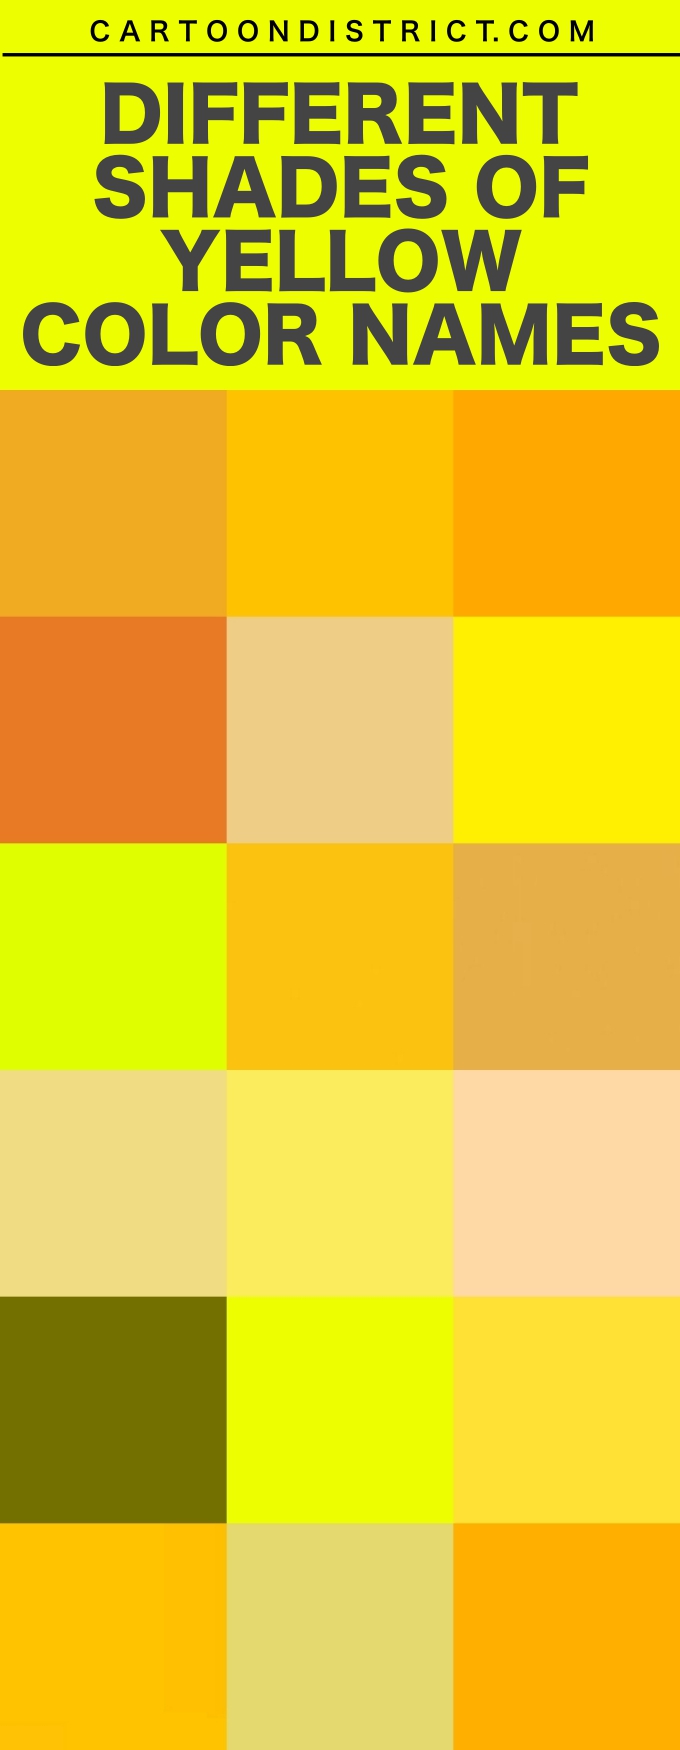 Different Shades of Yellow Color Names